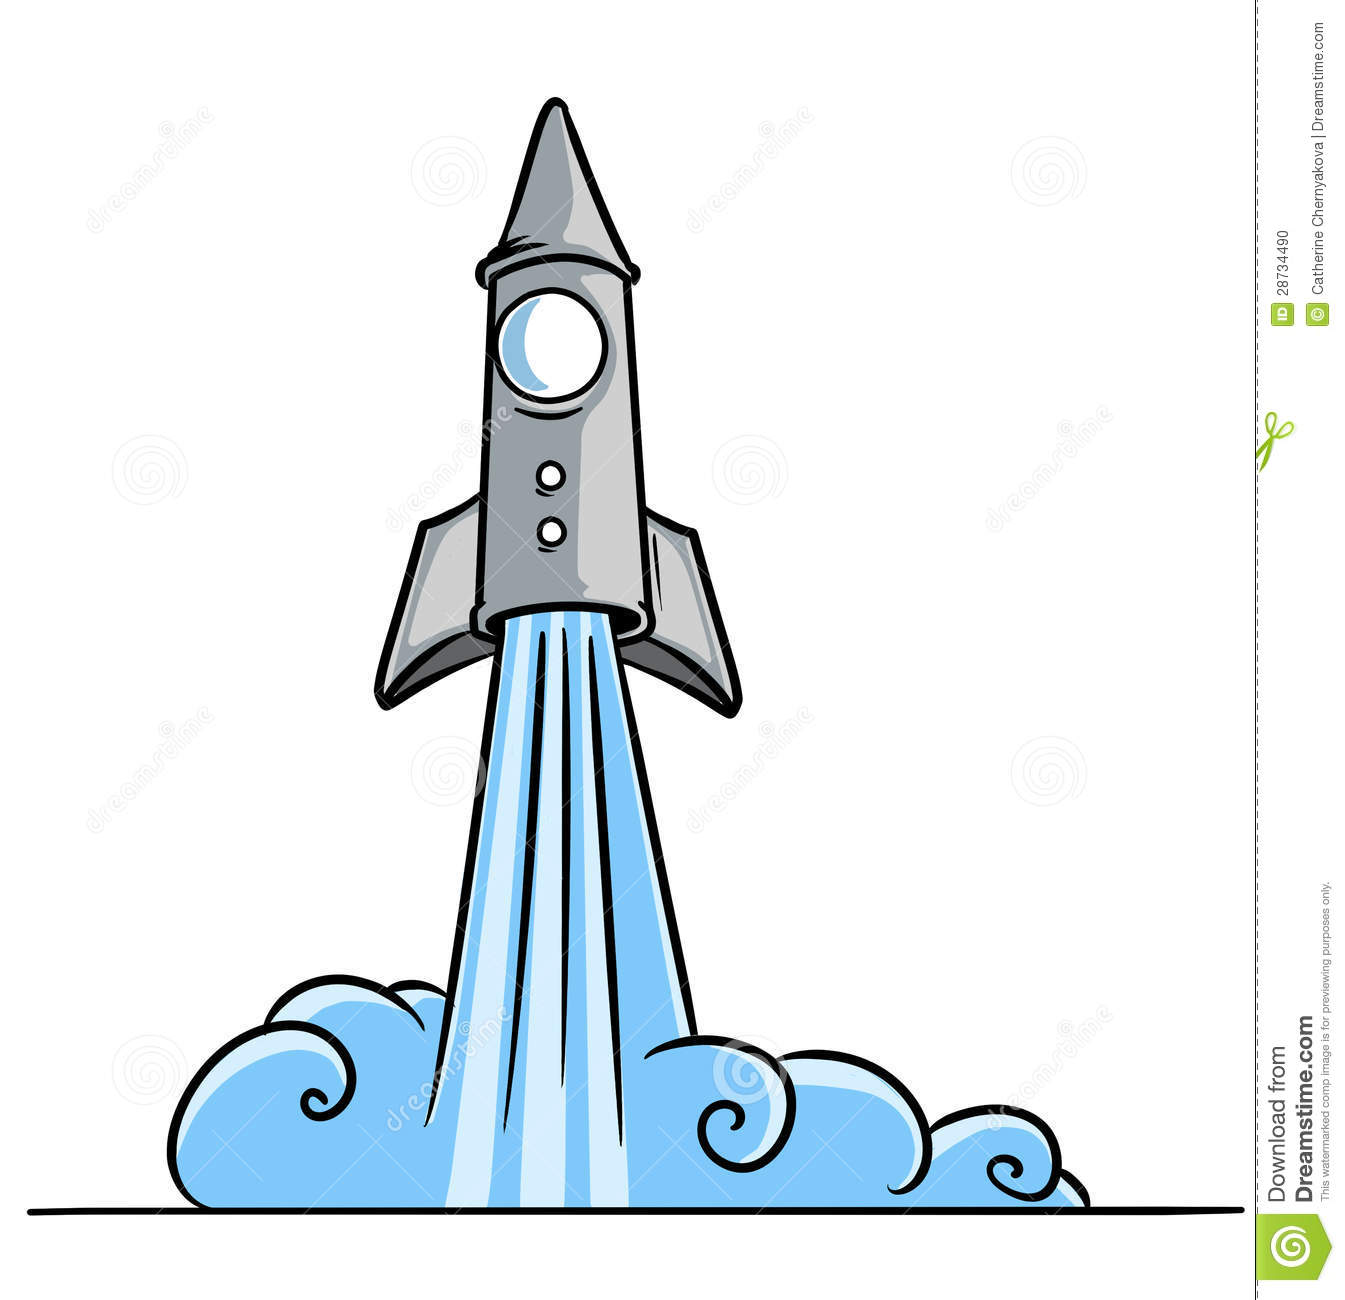 Launch Blast Off A Rocket Into Cosmos Minimalism Isolated Illustration